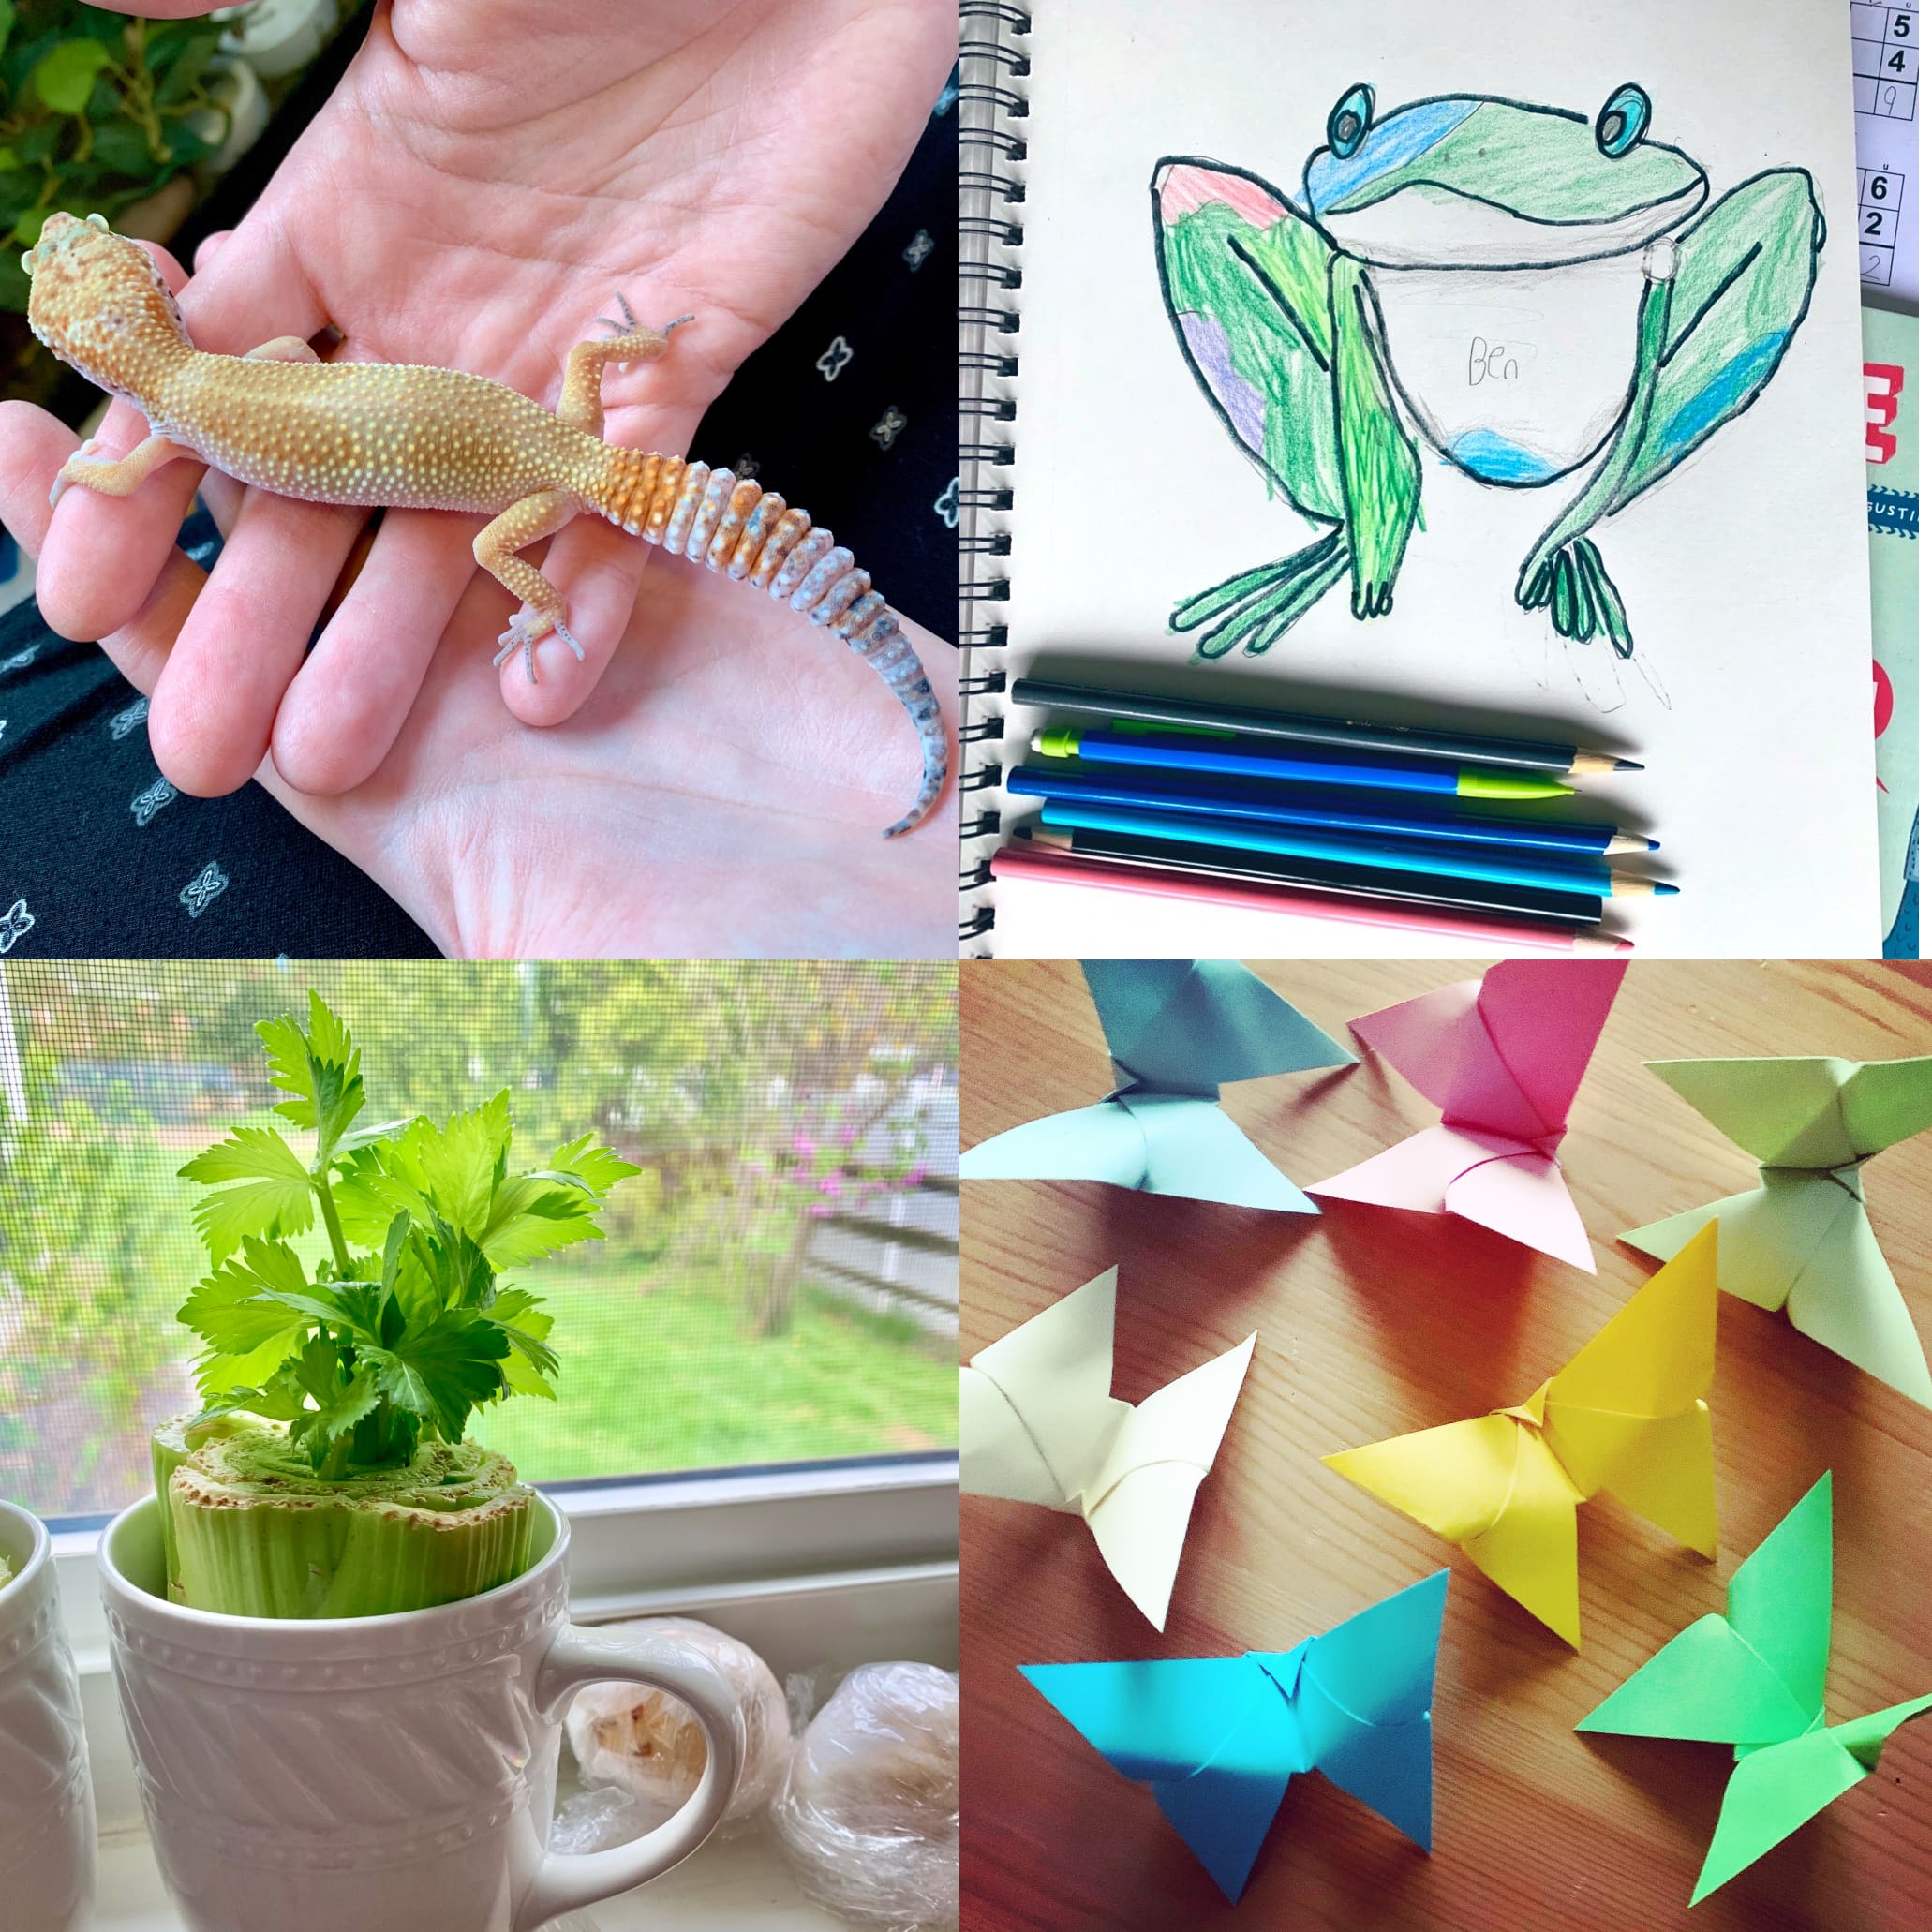 A lizard, origami, drawing, and celery plant